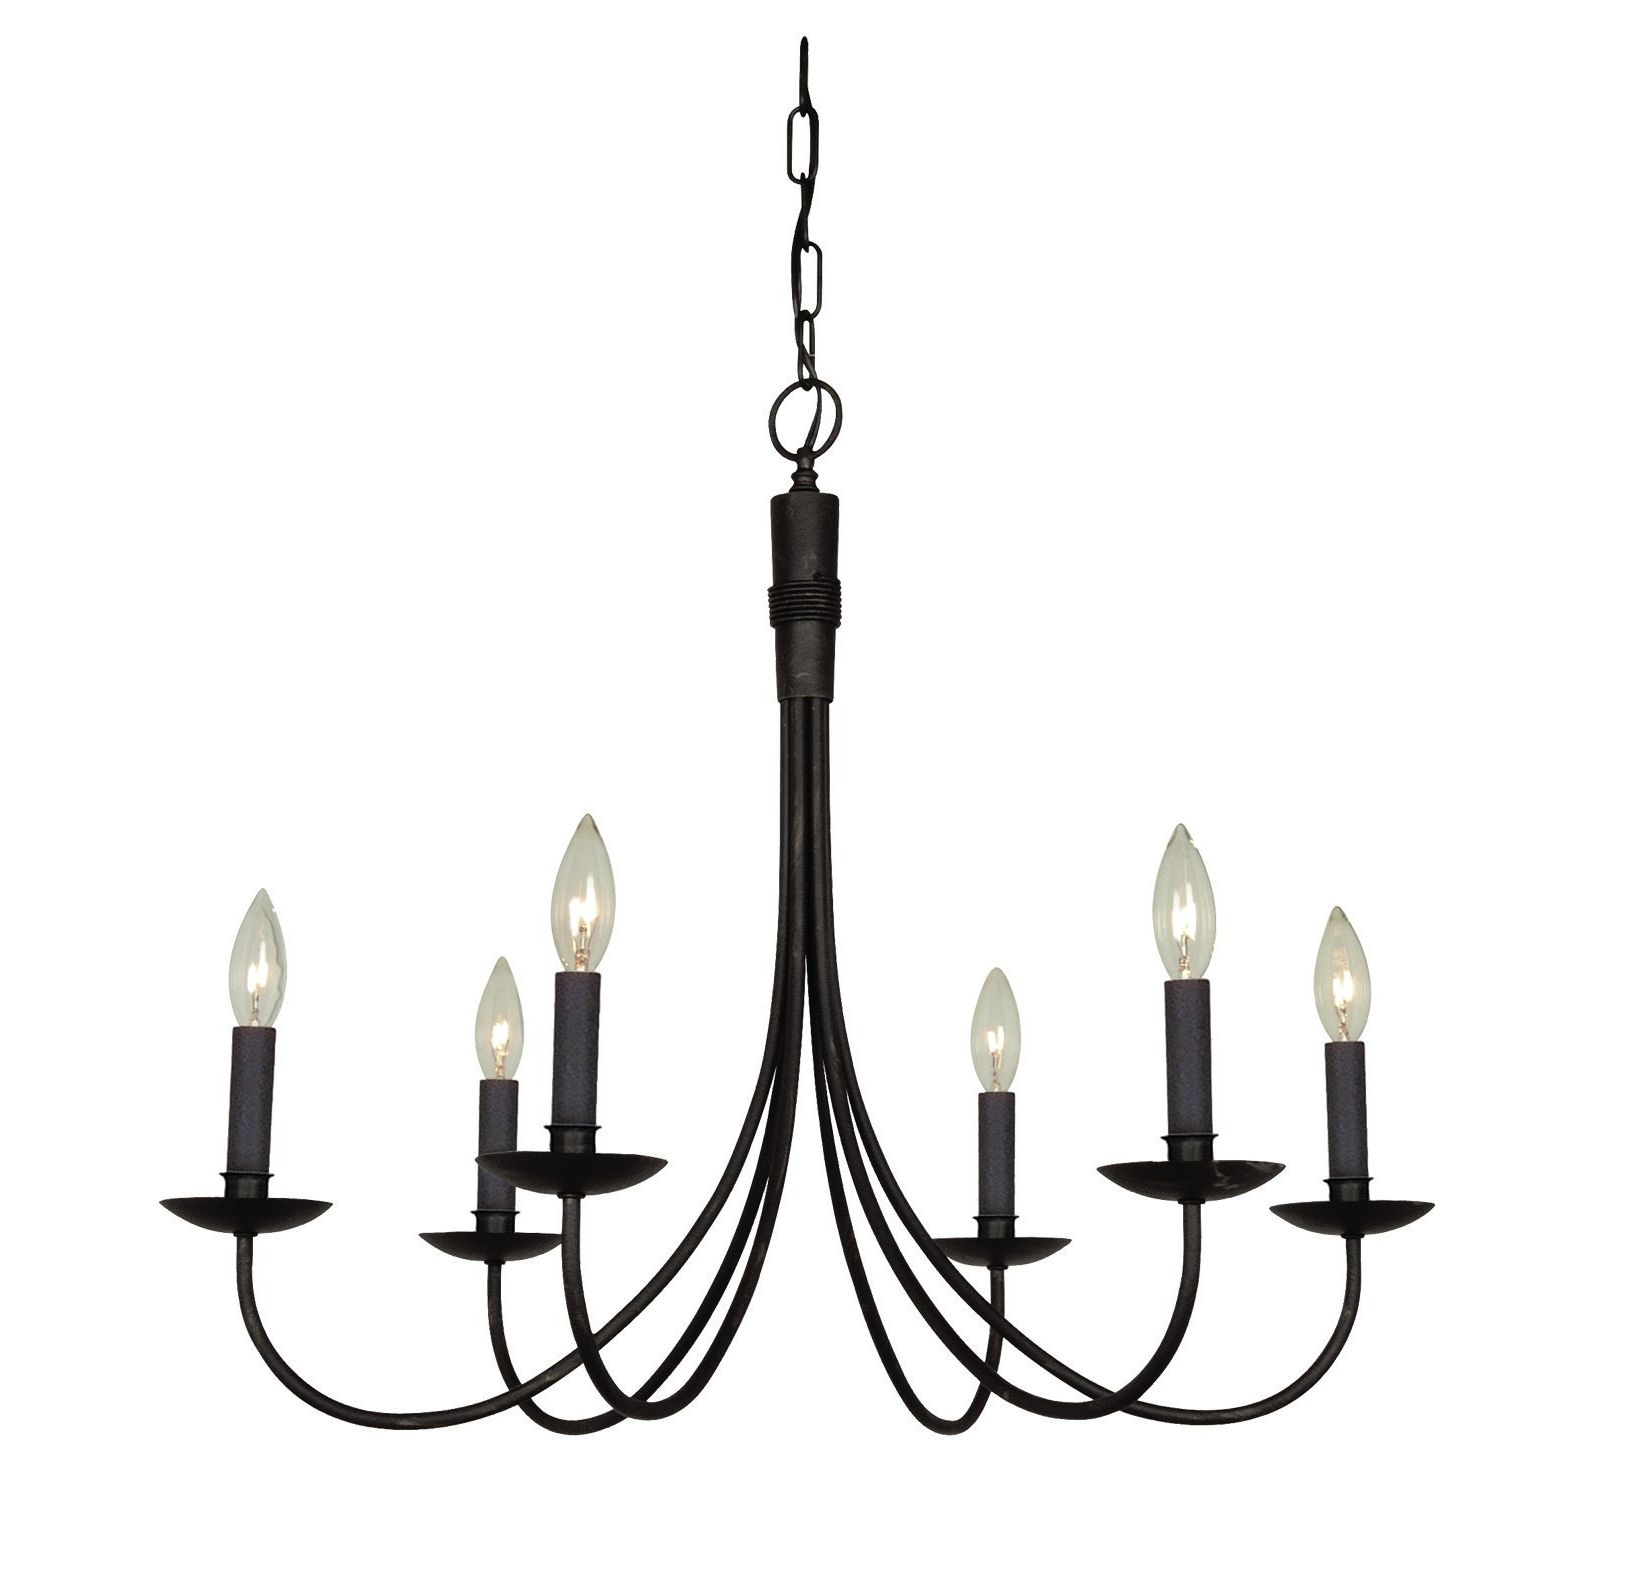 Souders 6 Light Candle Style Chandelier With Regard To Most Popular Perseus 6 Light Candle Style Chandeliers (View 22 of 25)